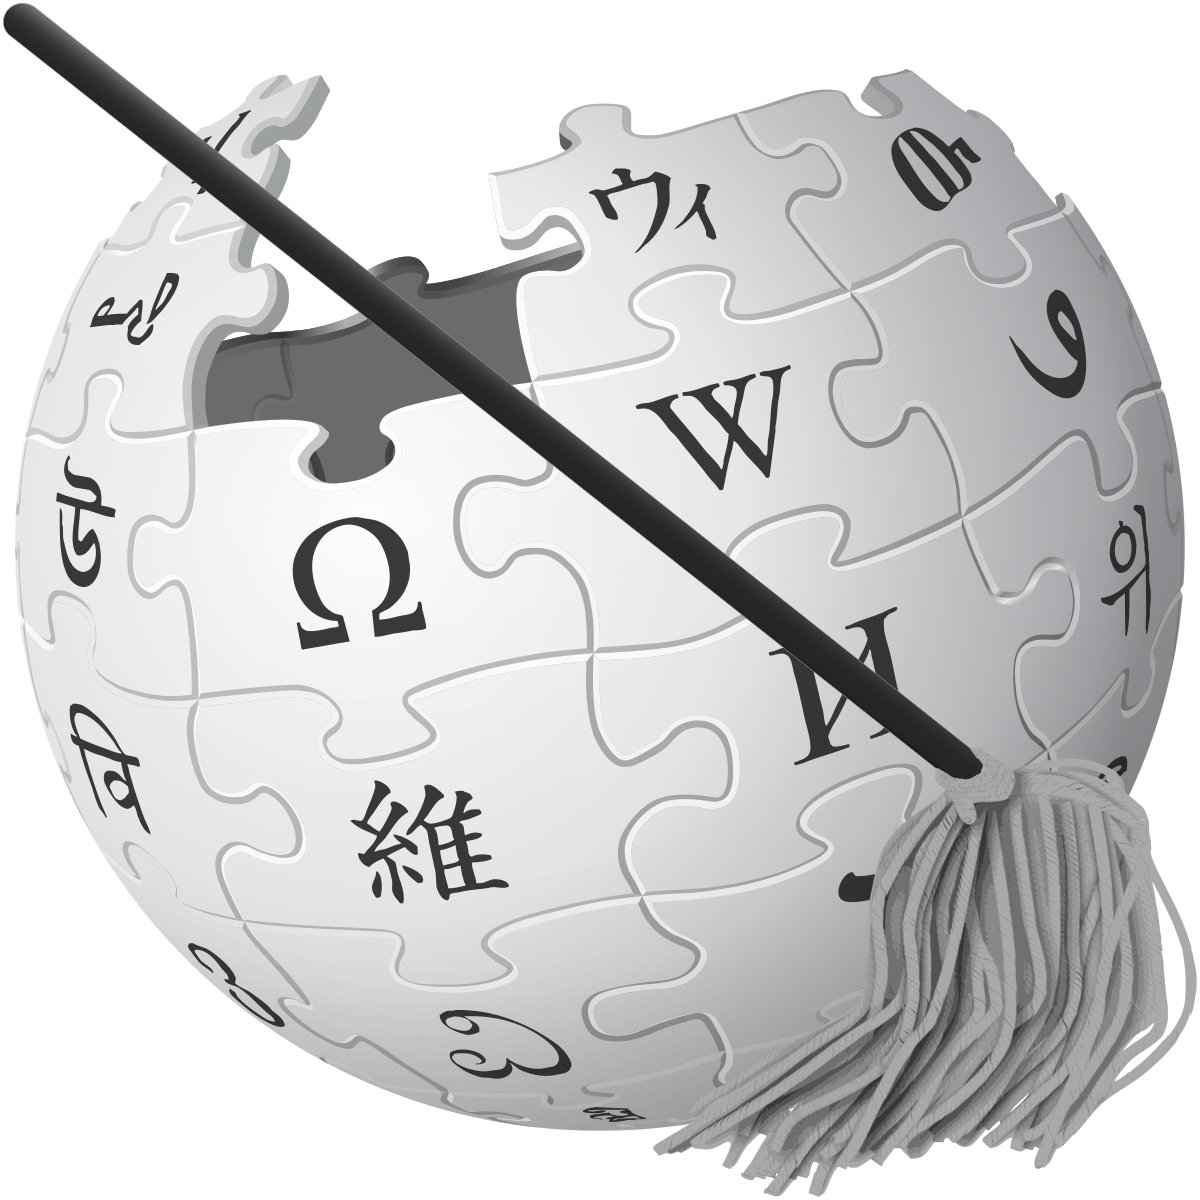 Wikipedia is switching from M